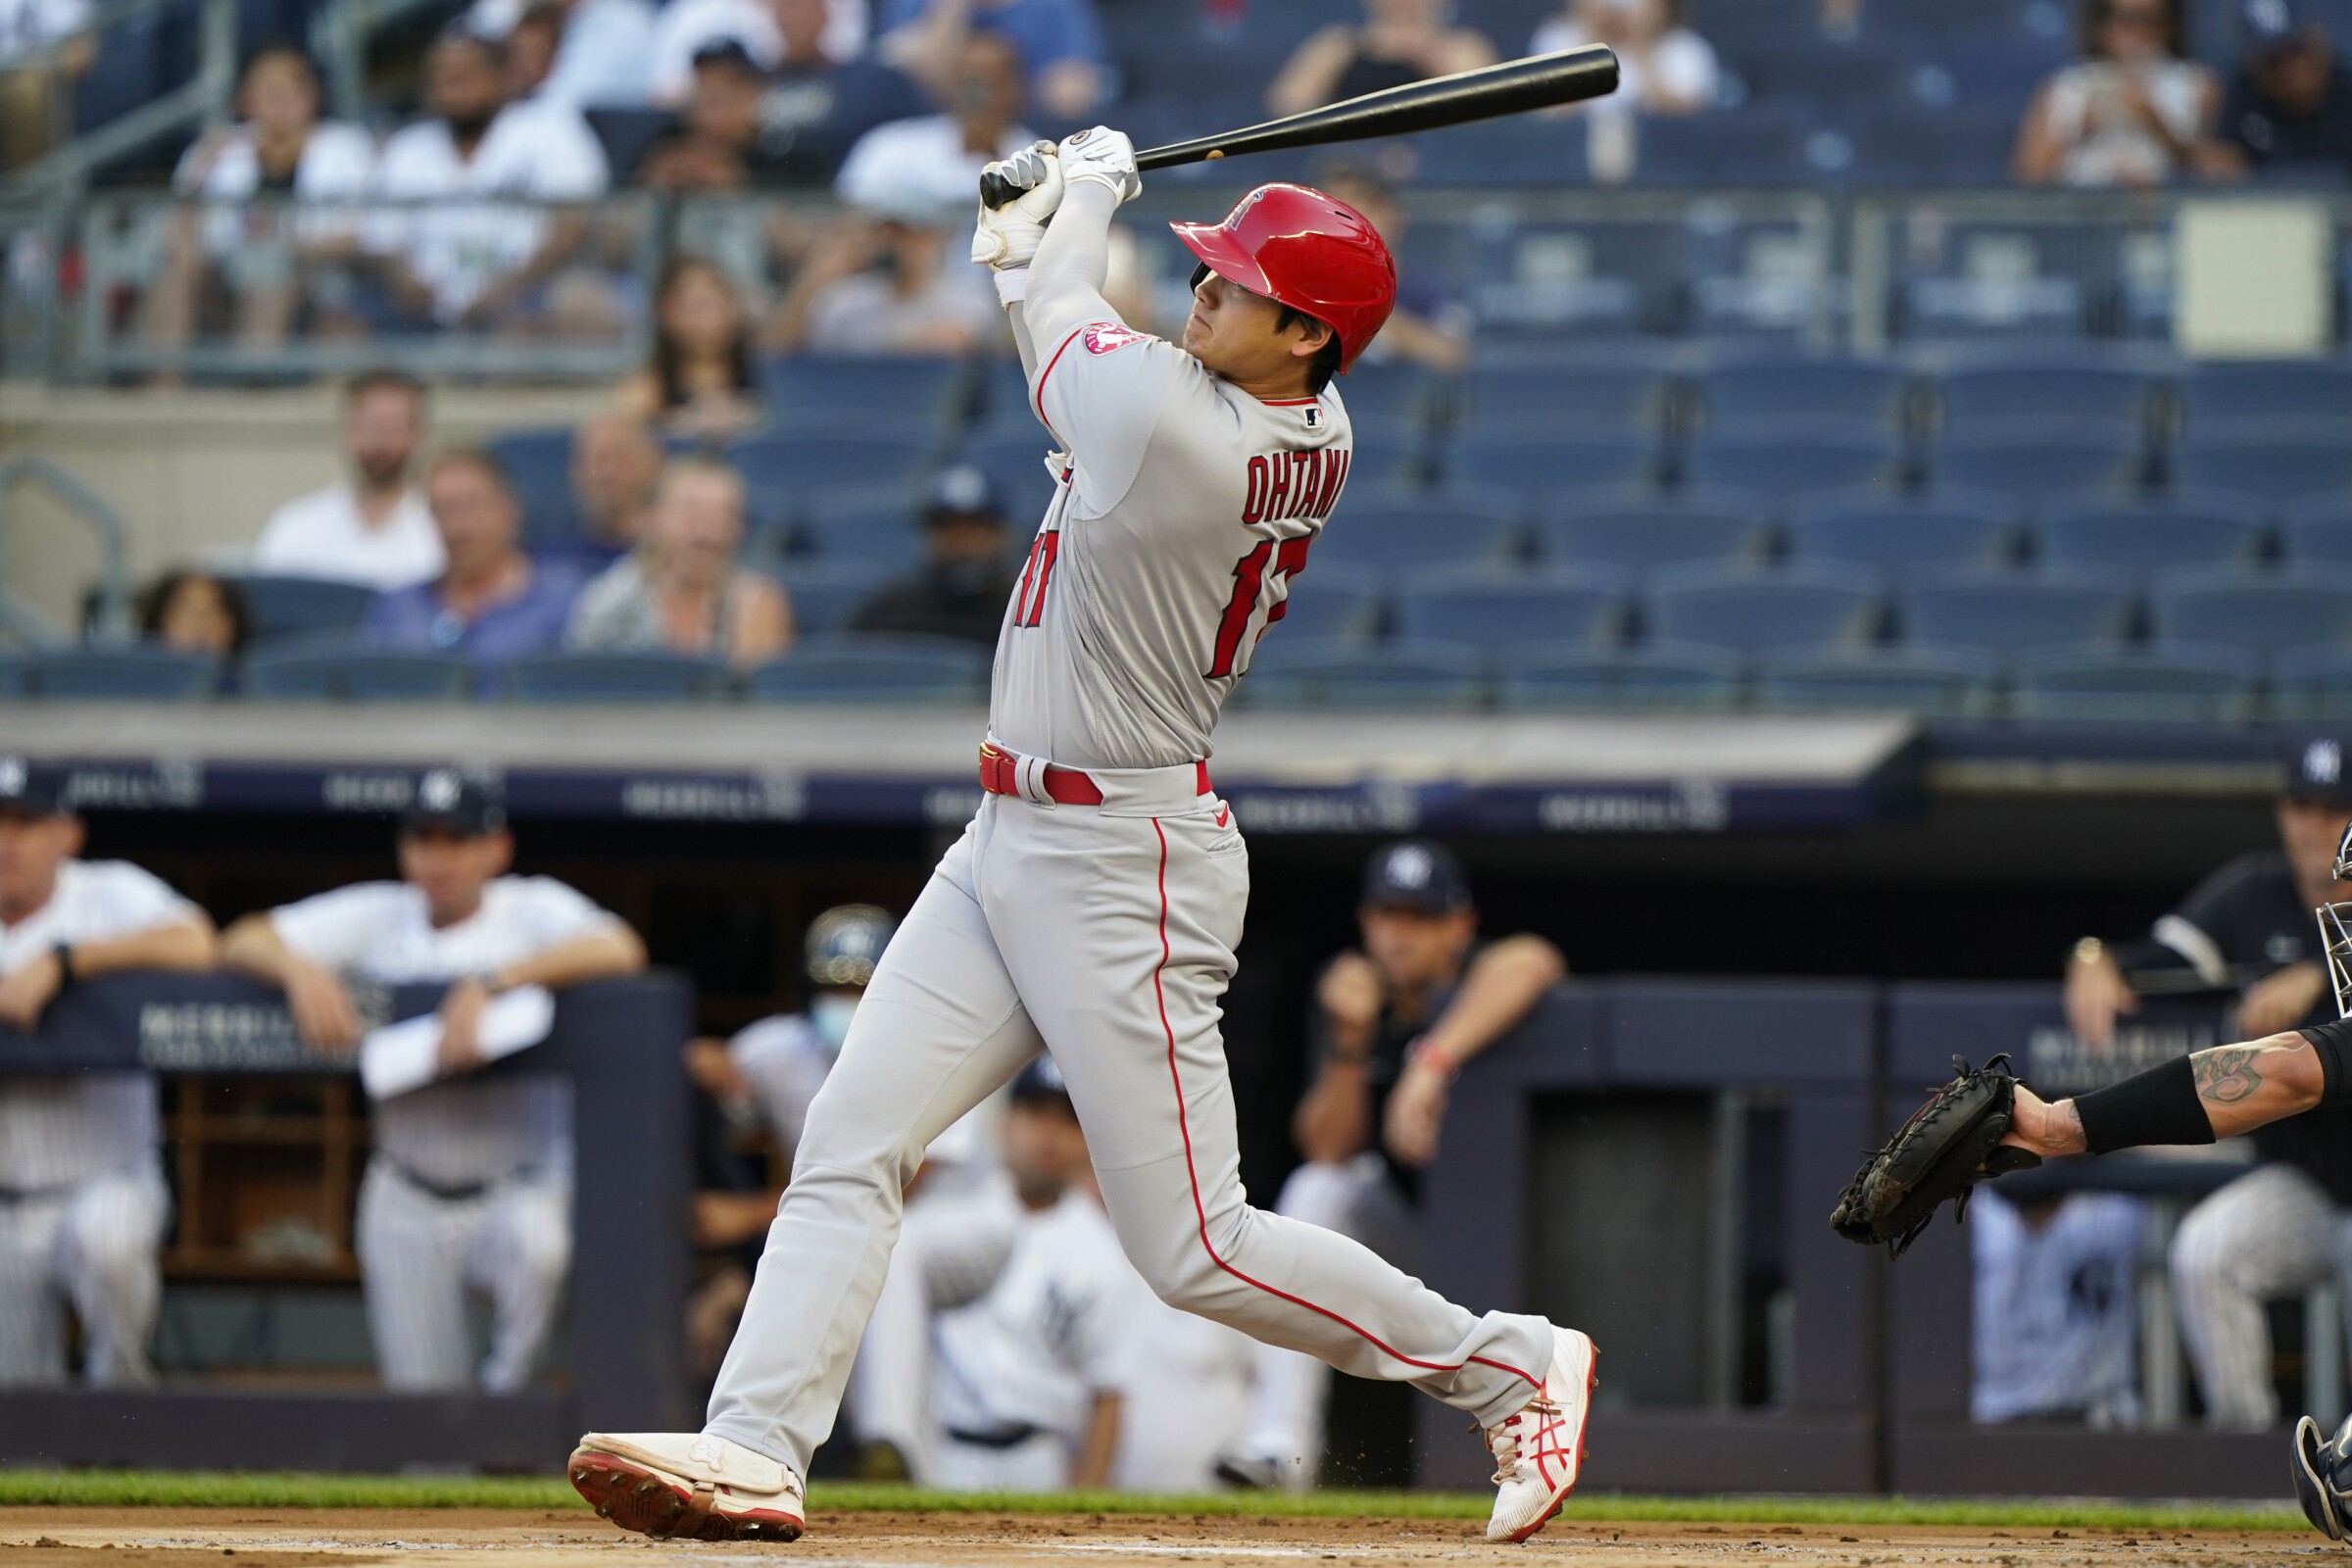 Shohei Ohtani of the Angels follows through on a first-inning home run at Yankee Stadium on Monday.